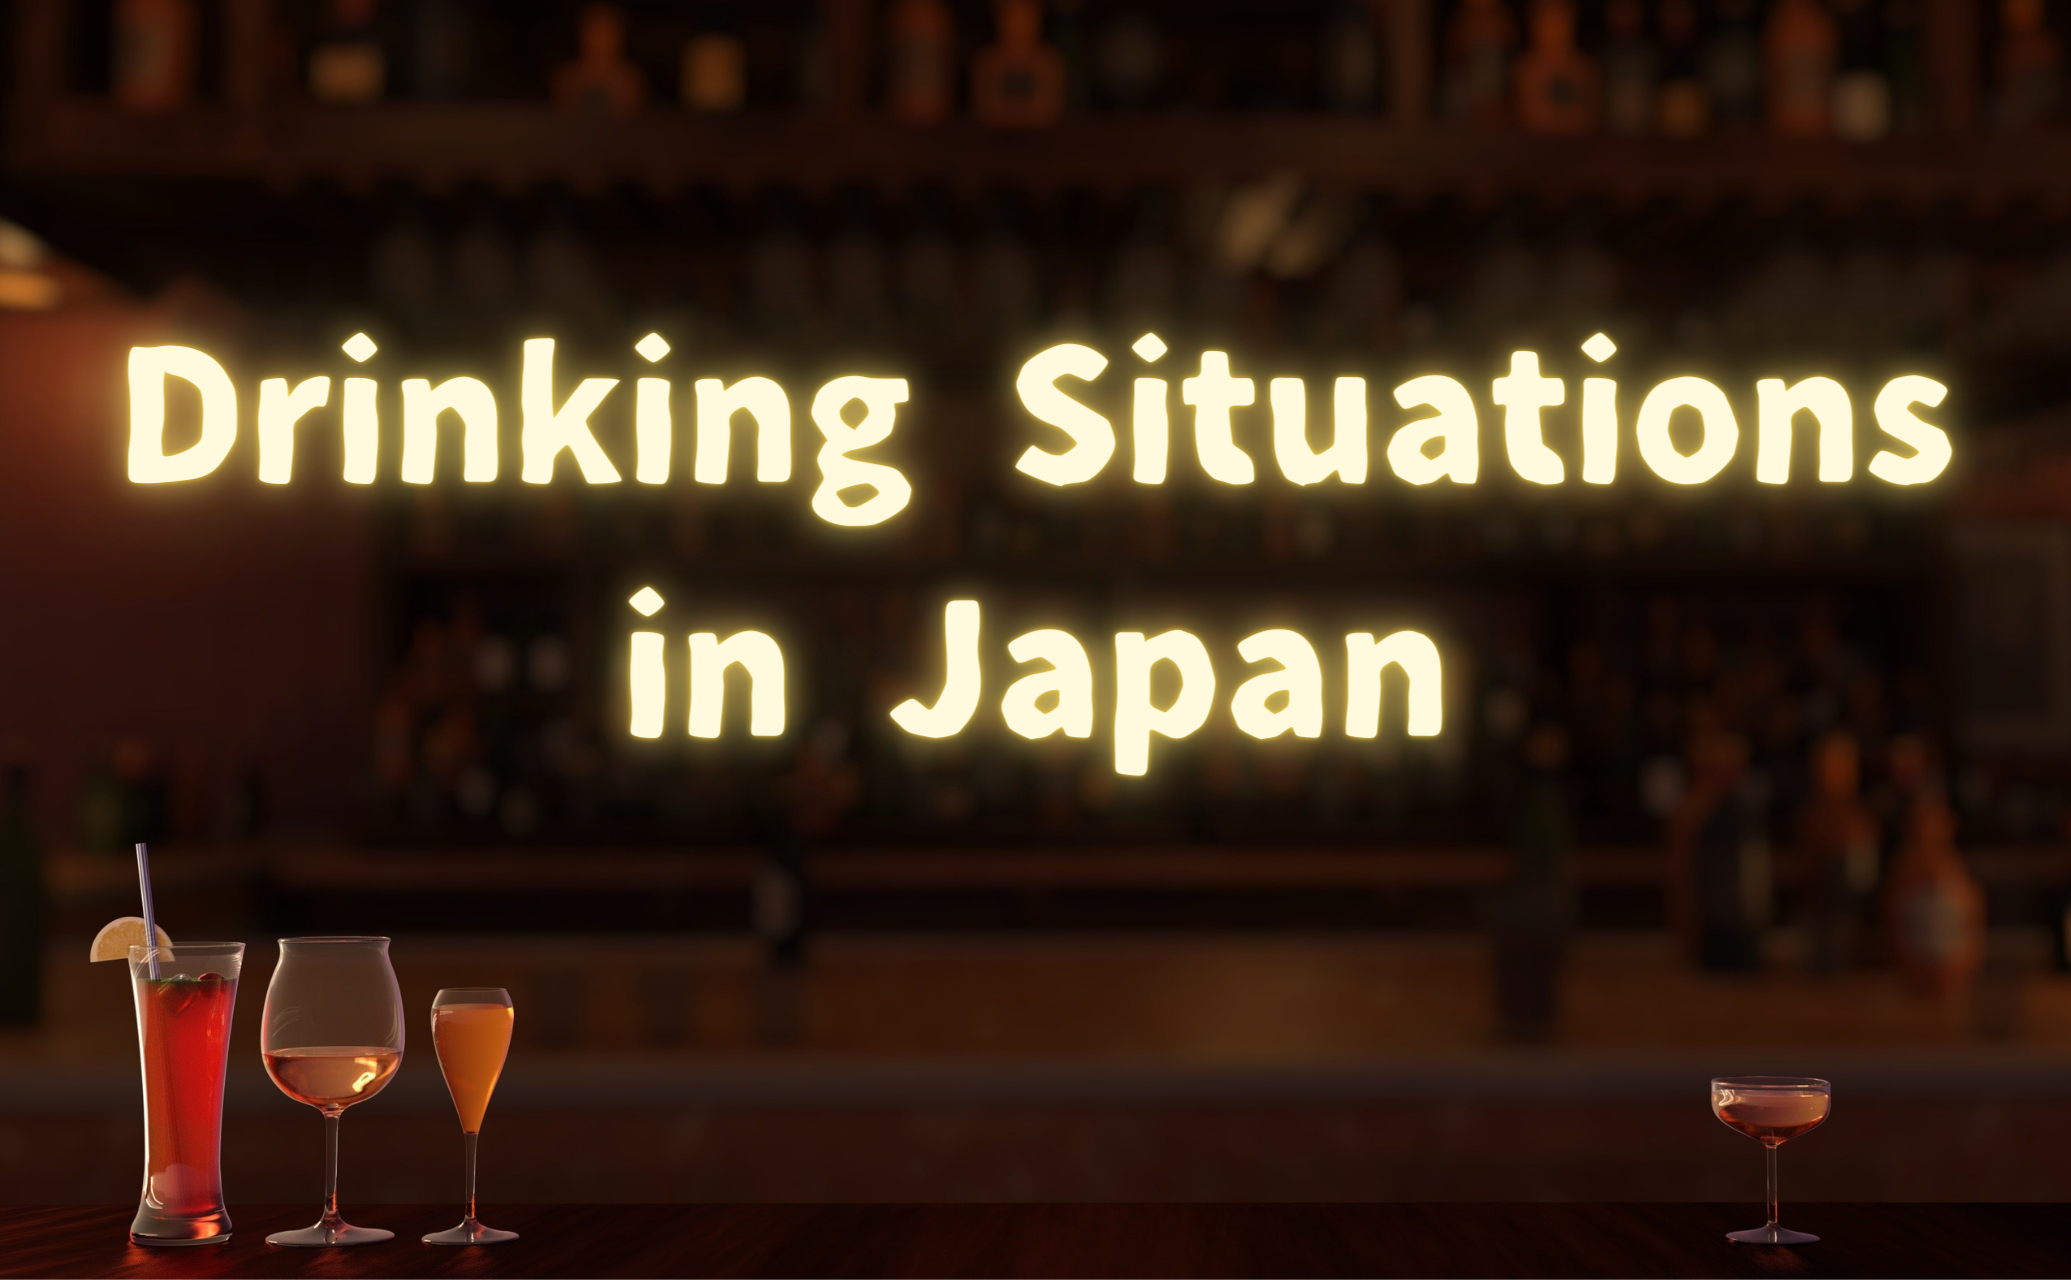 Drinking Situations in Japan